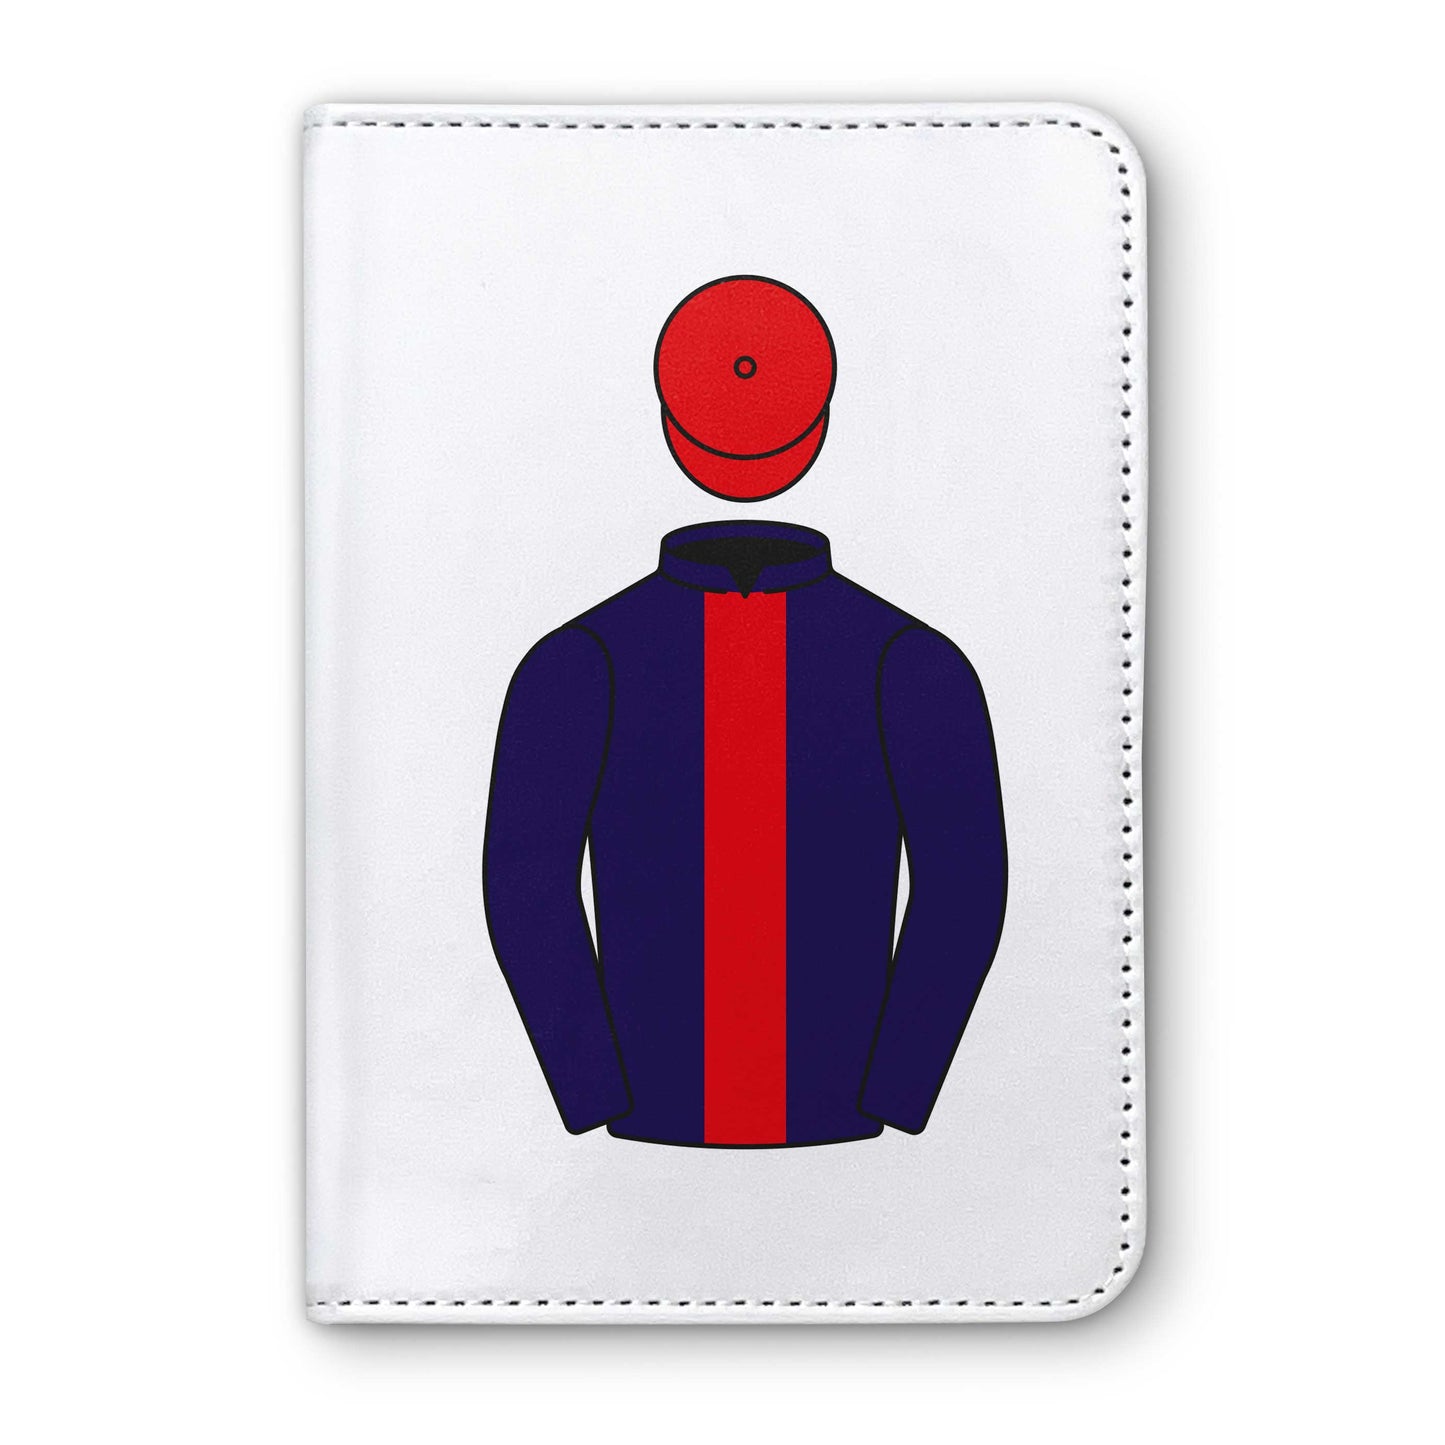 The Not Afraid Partnership Horse Racing Passport Holder - Hacked Up Horse Racing Gifts